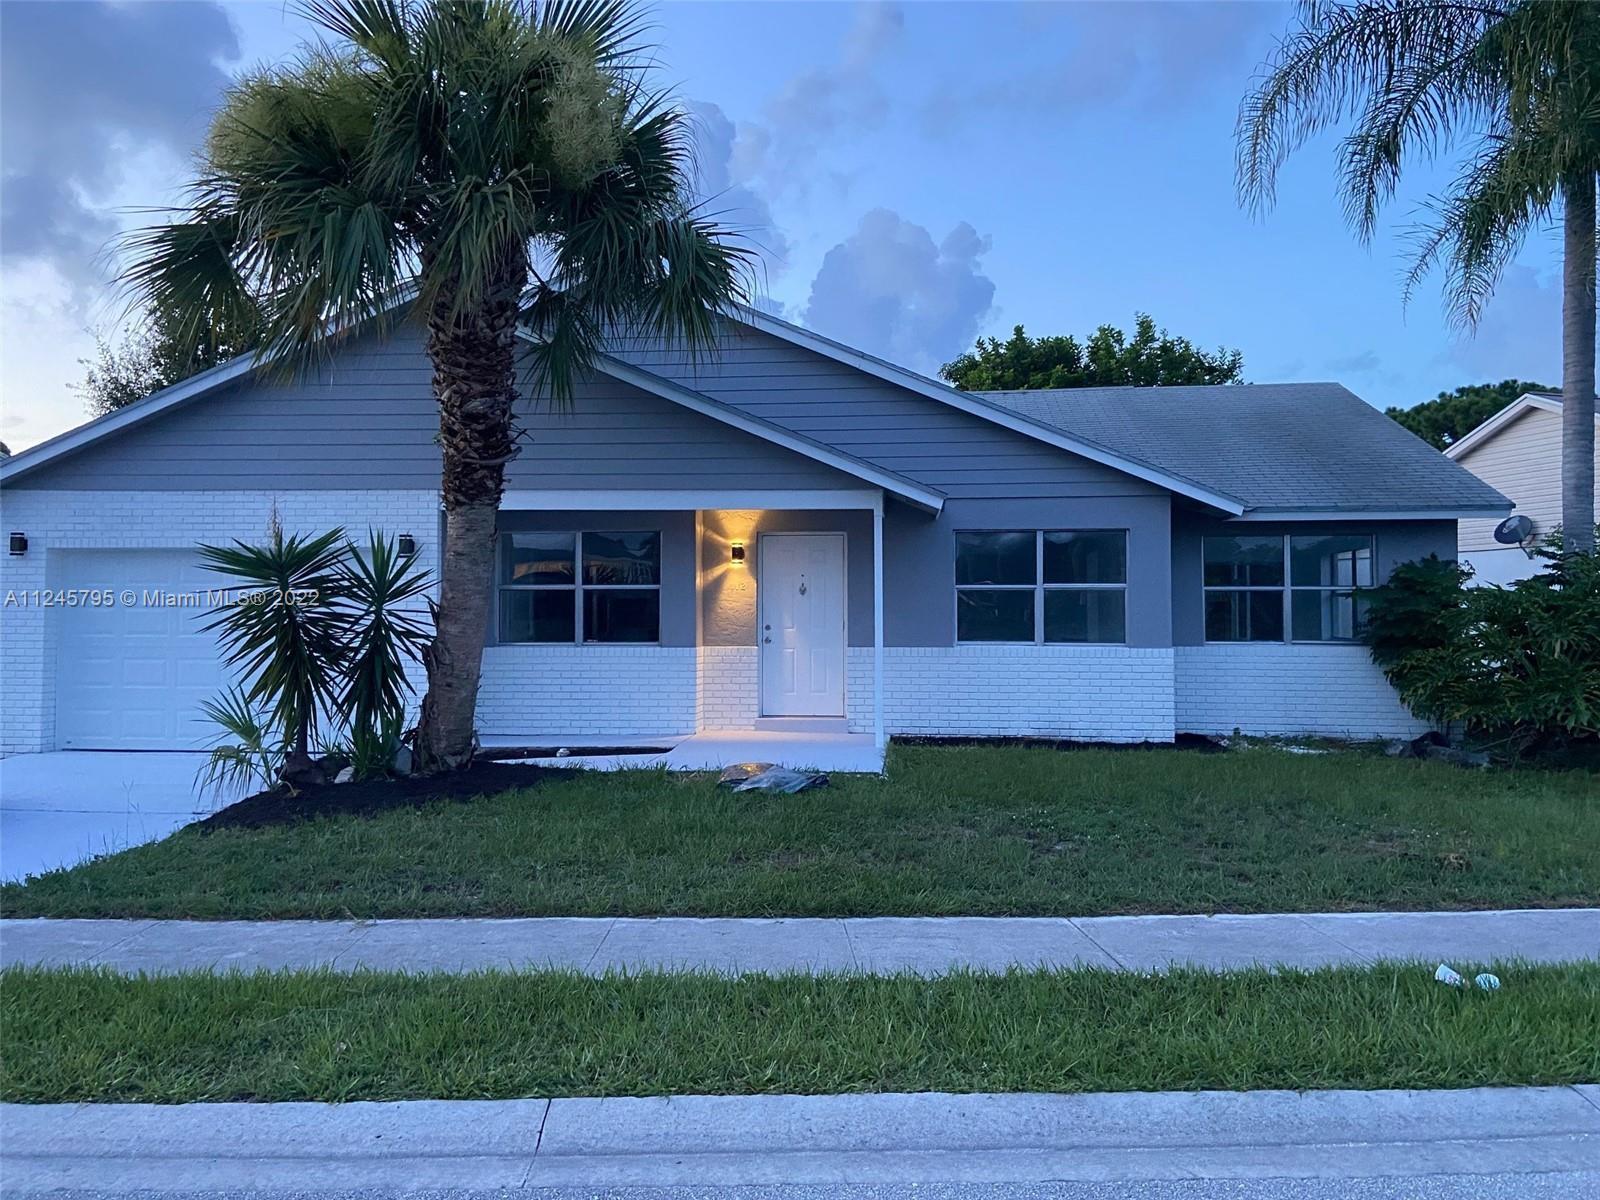 Don't miss the beautifully remodeled 3/2 in gorgeous Jupiter.  New floors, fully remodeled kitchen w